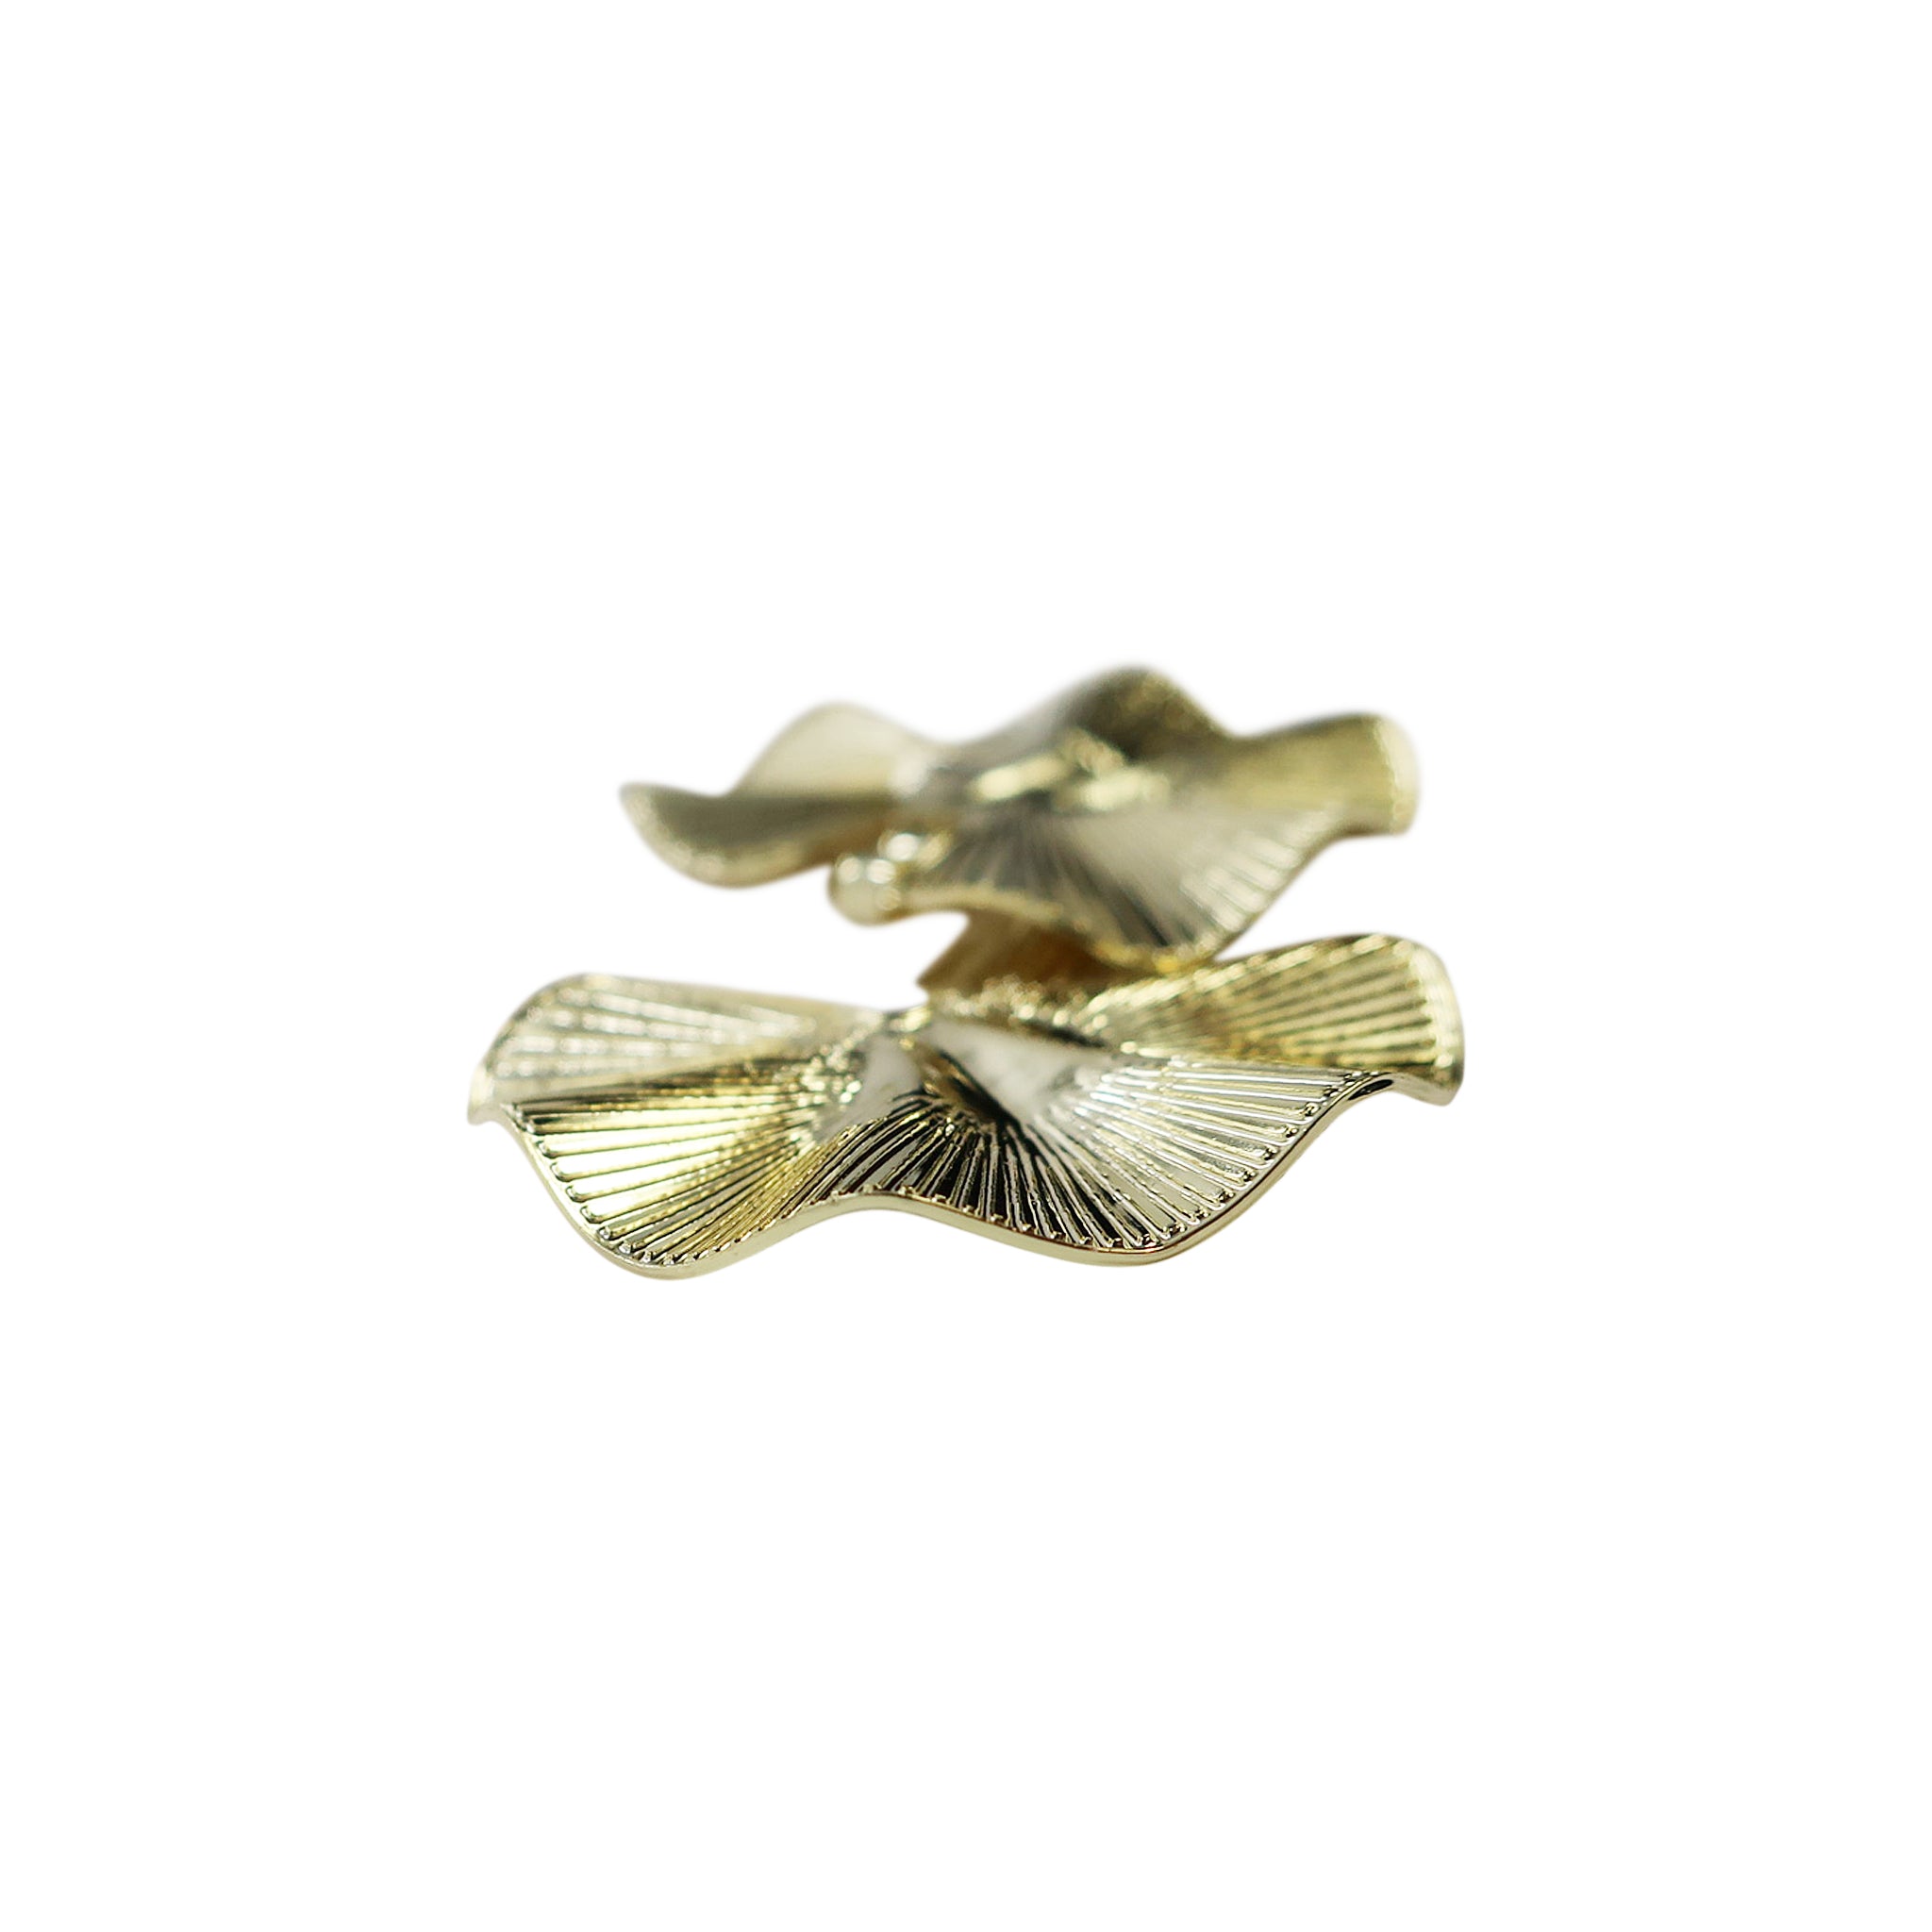 Sheila Fajl Small Clay Stud Earrings in Gold Plated